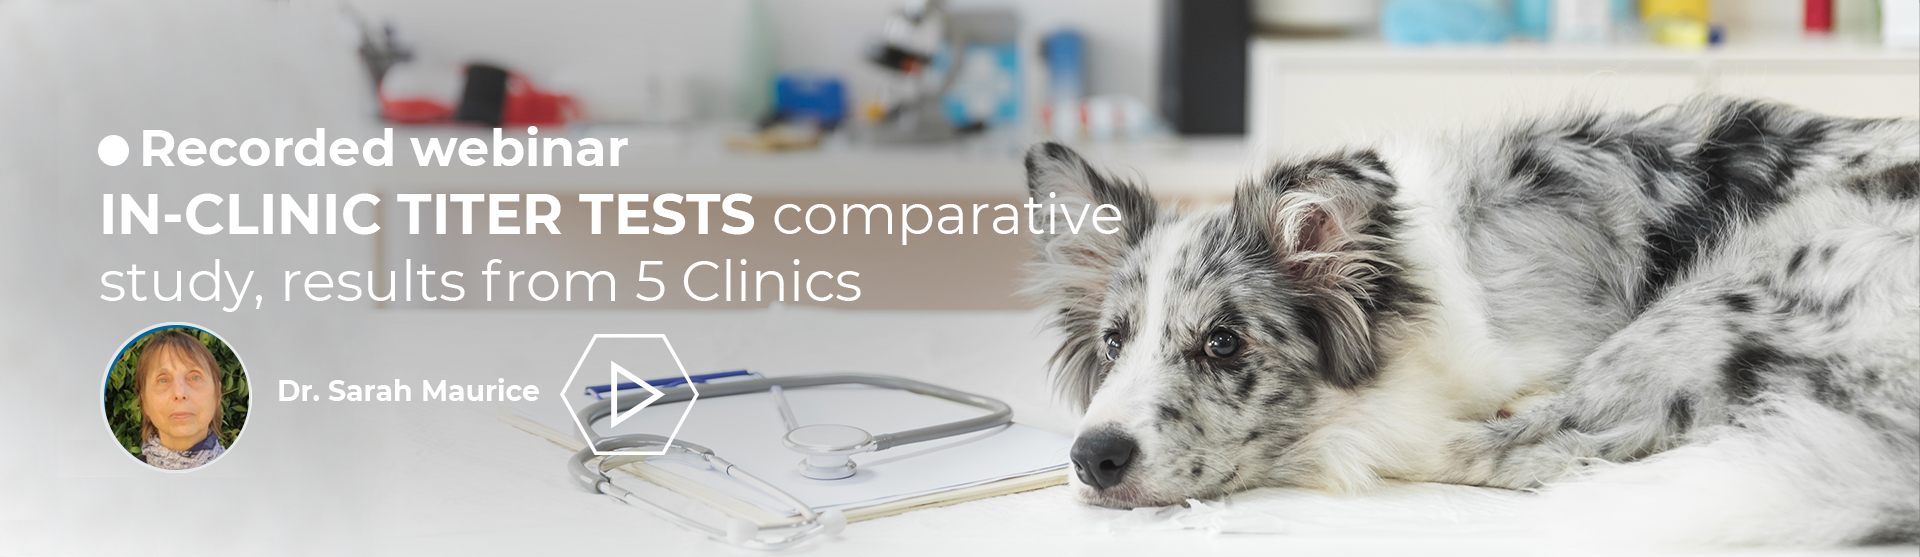 In-clinic canine titer test